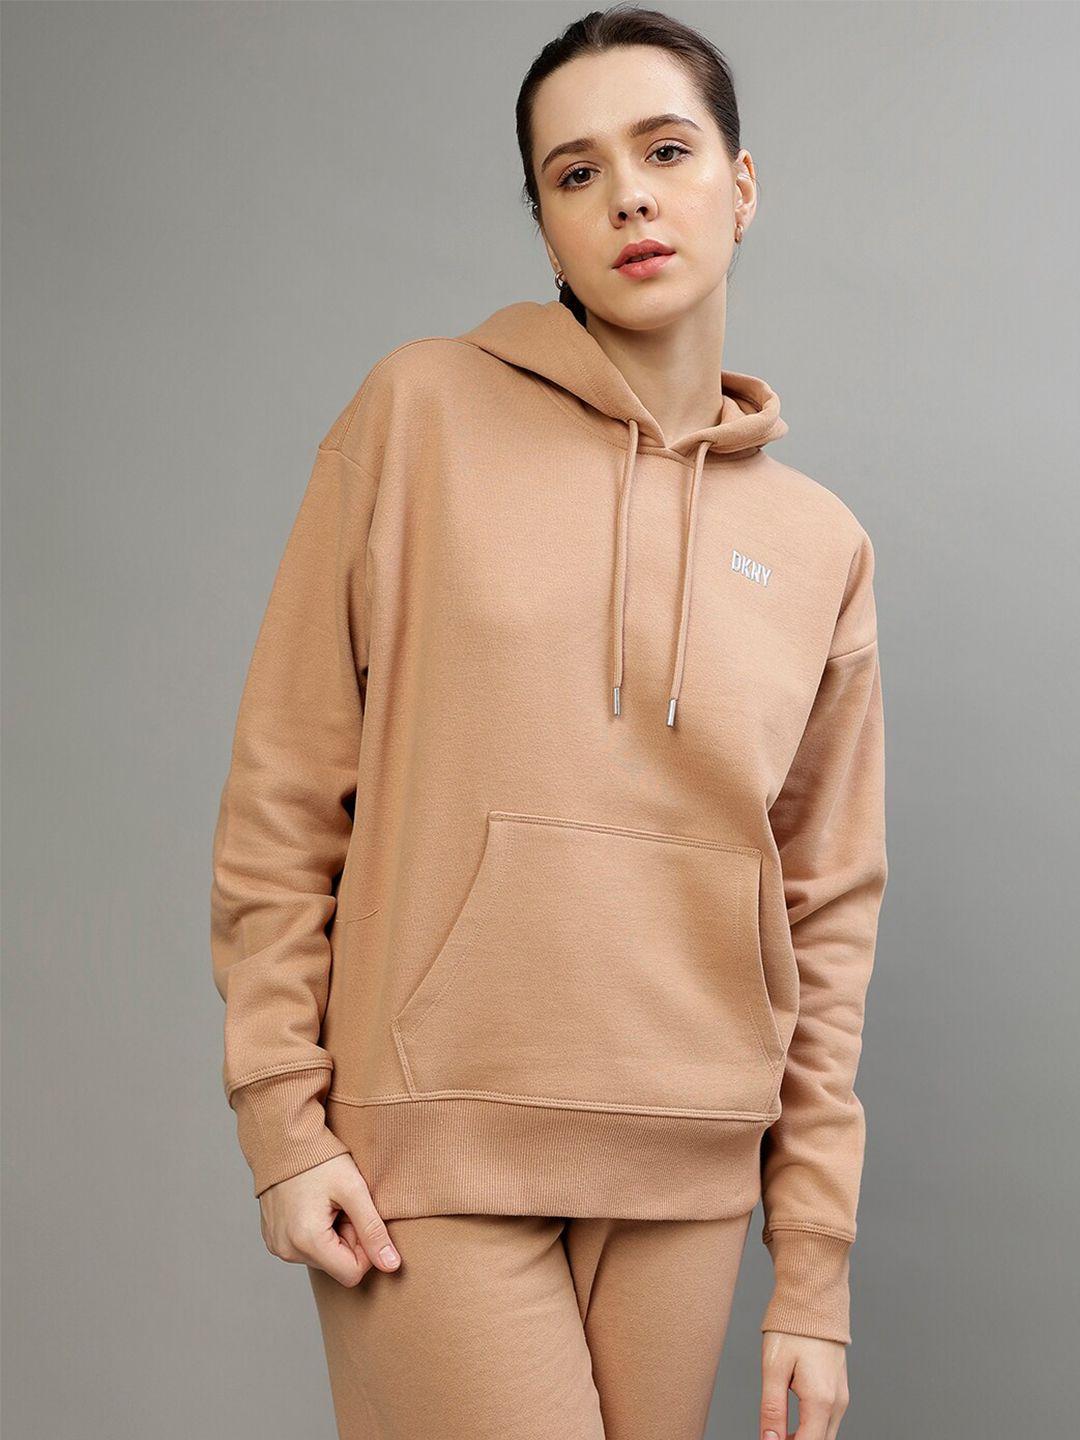 dkny long sleeves hooded pullover